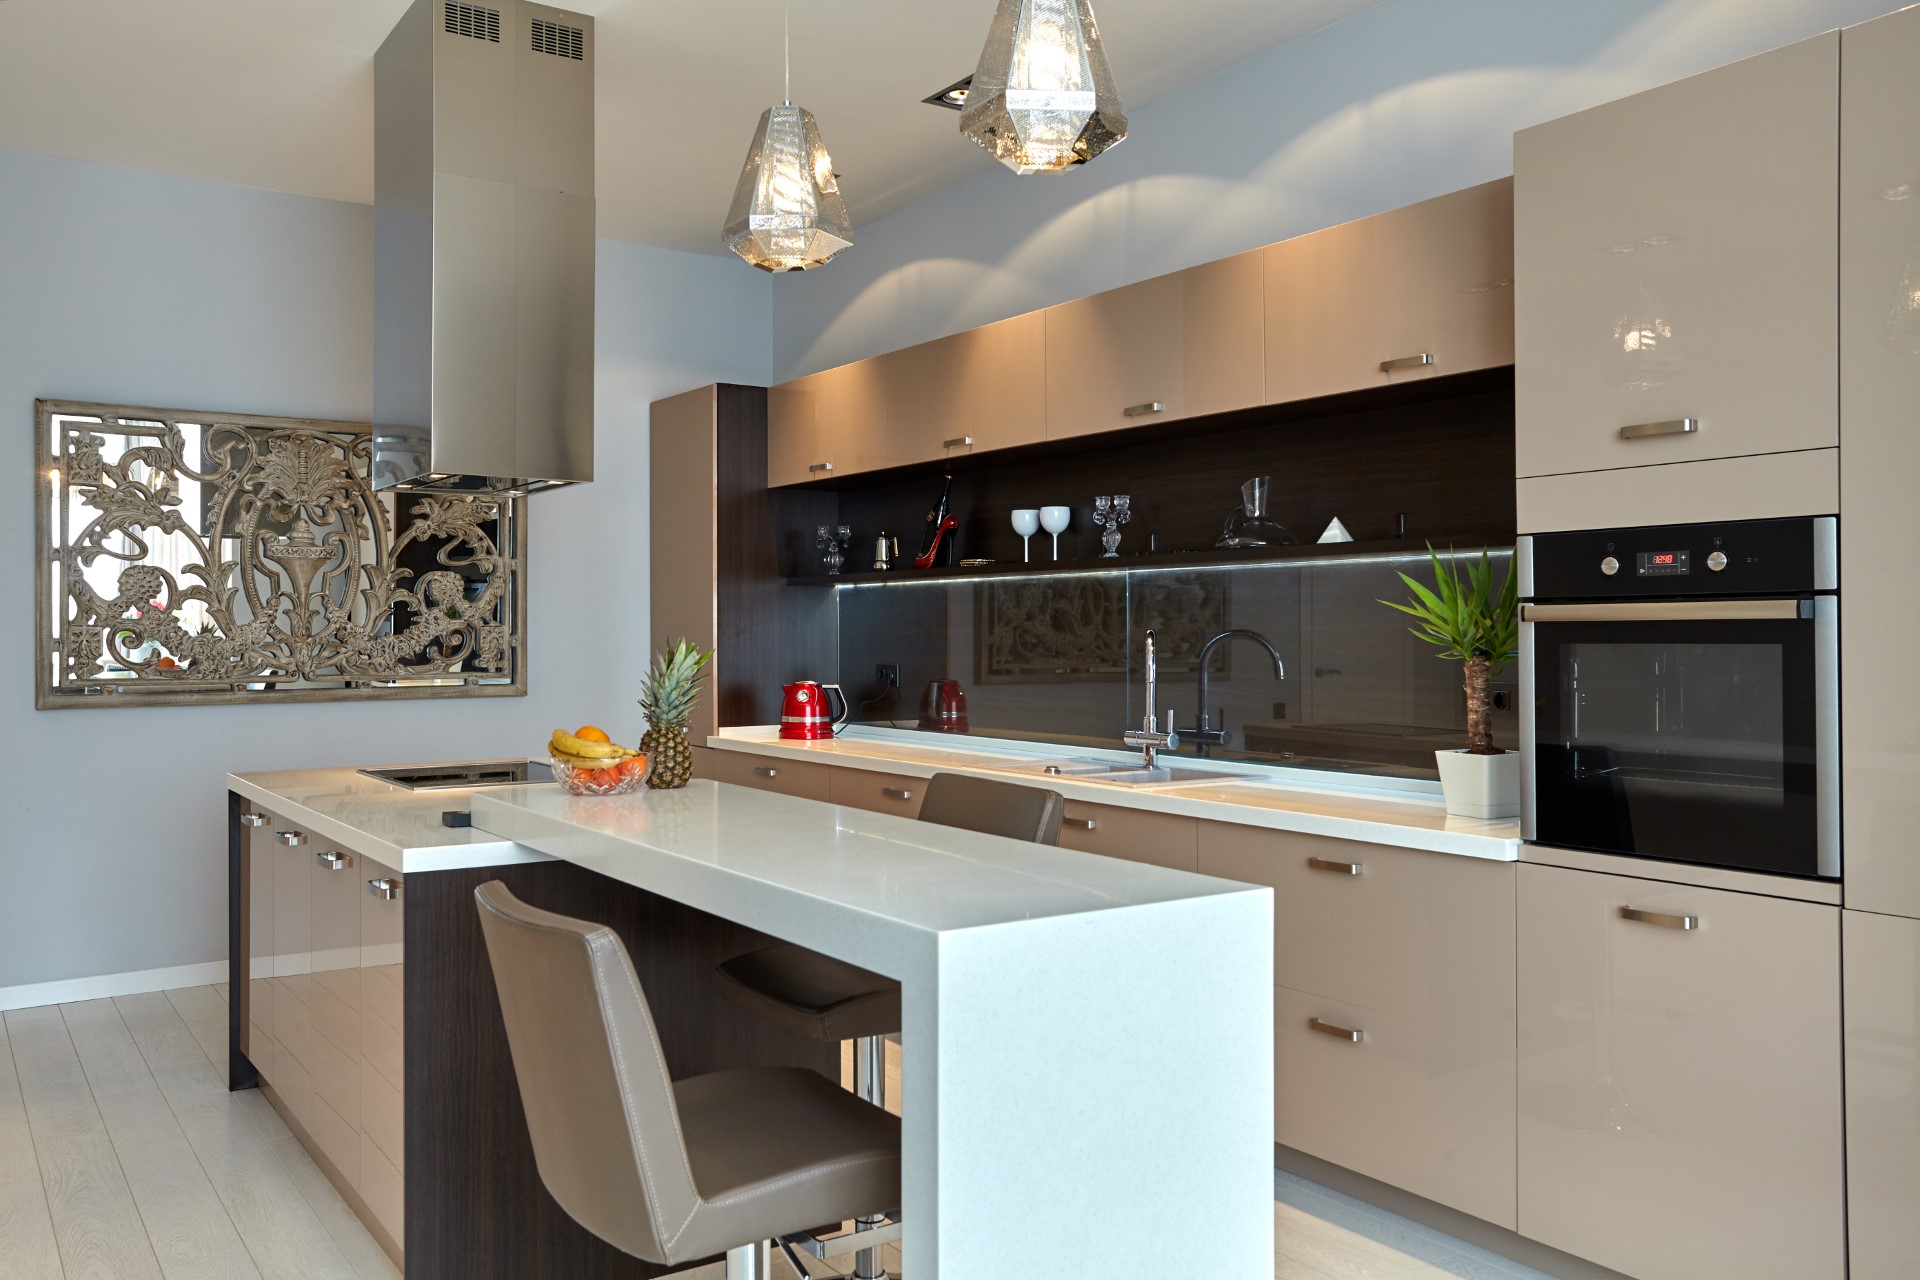 This eccentric modern kitchen has a touch of Indonesia design while keeping a minimalist structure about it. Great for someone who likes to keep it simple.